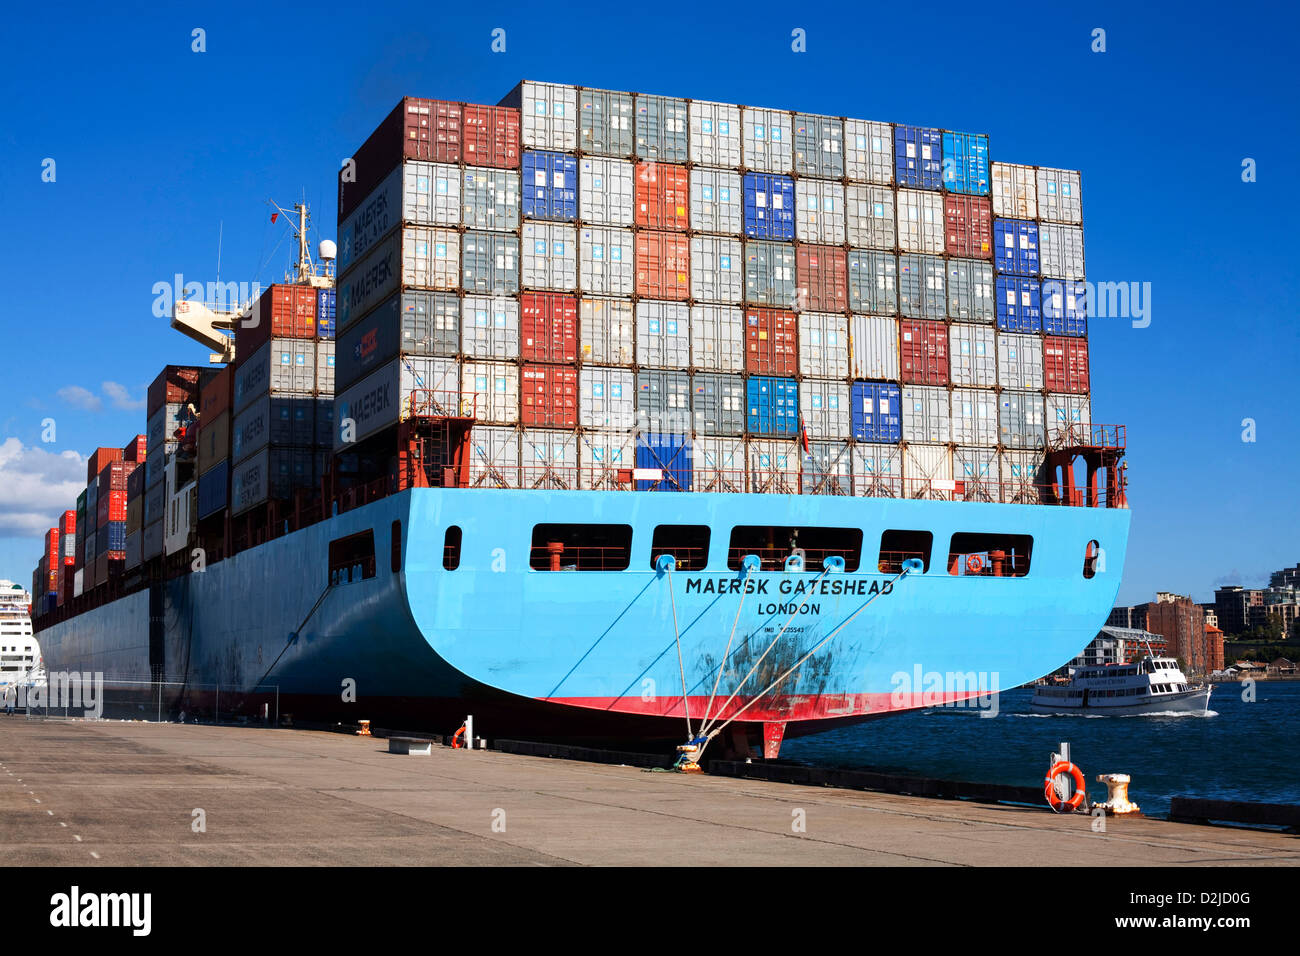 Image result for photos of container laden ships